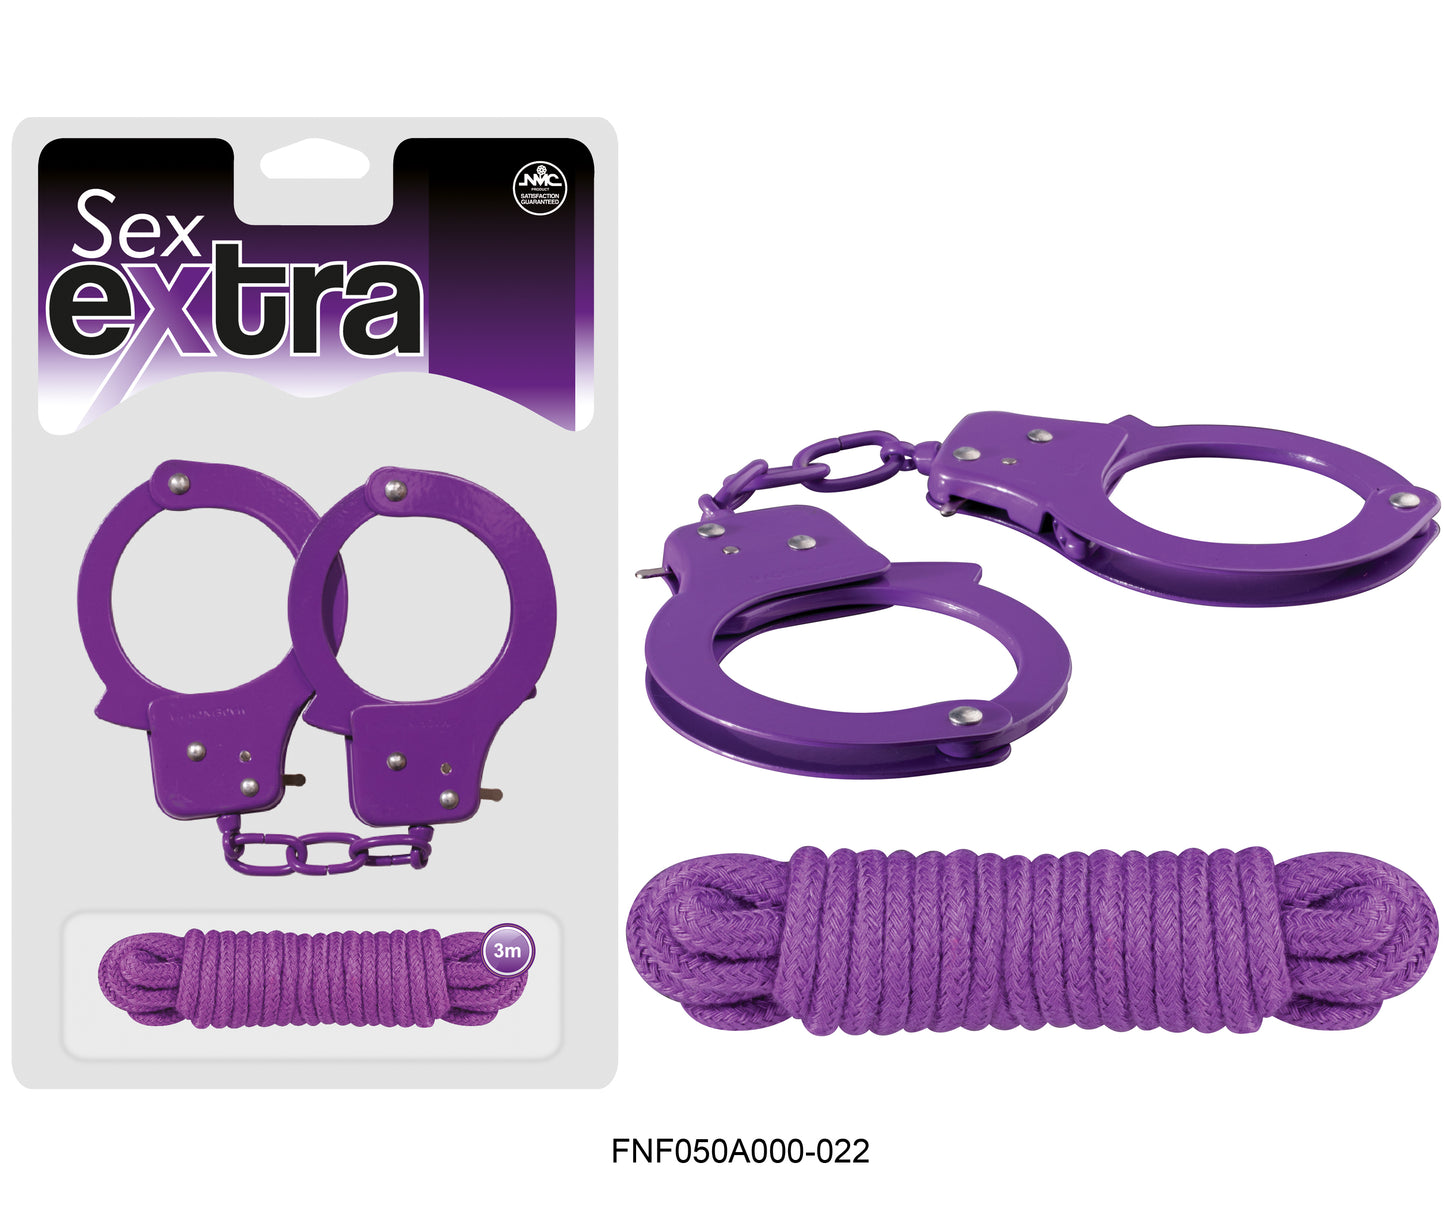 Sex Extra Cuffs and Rope